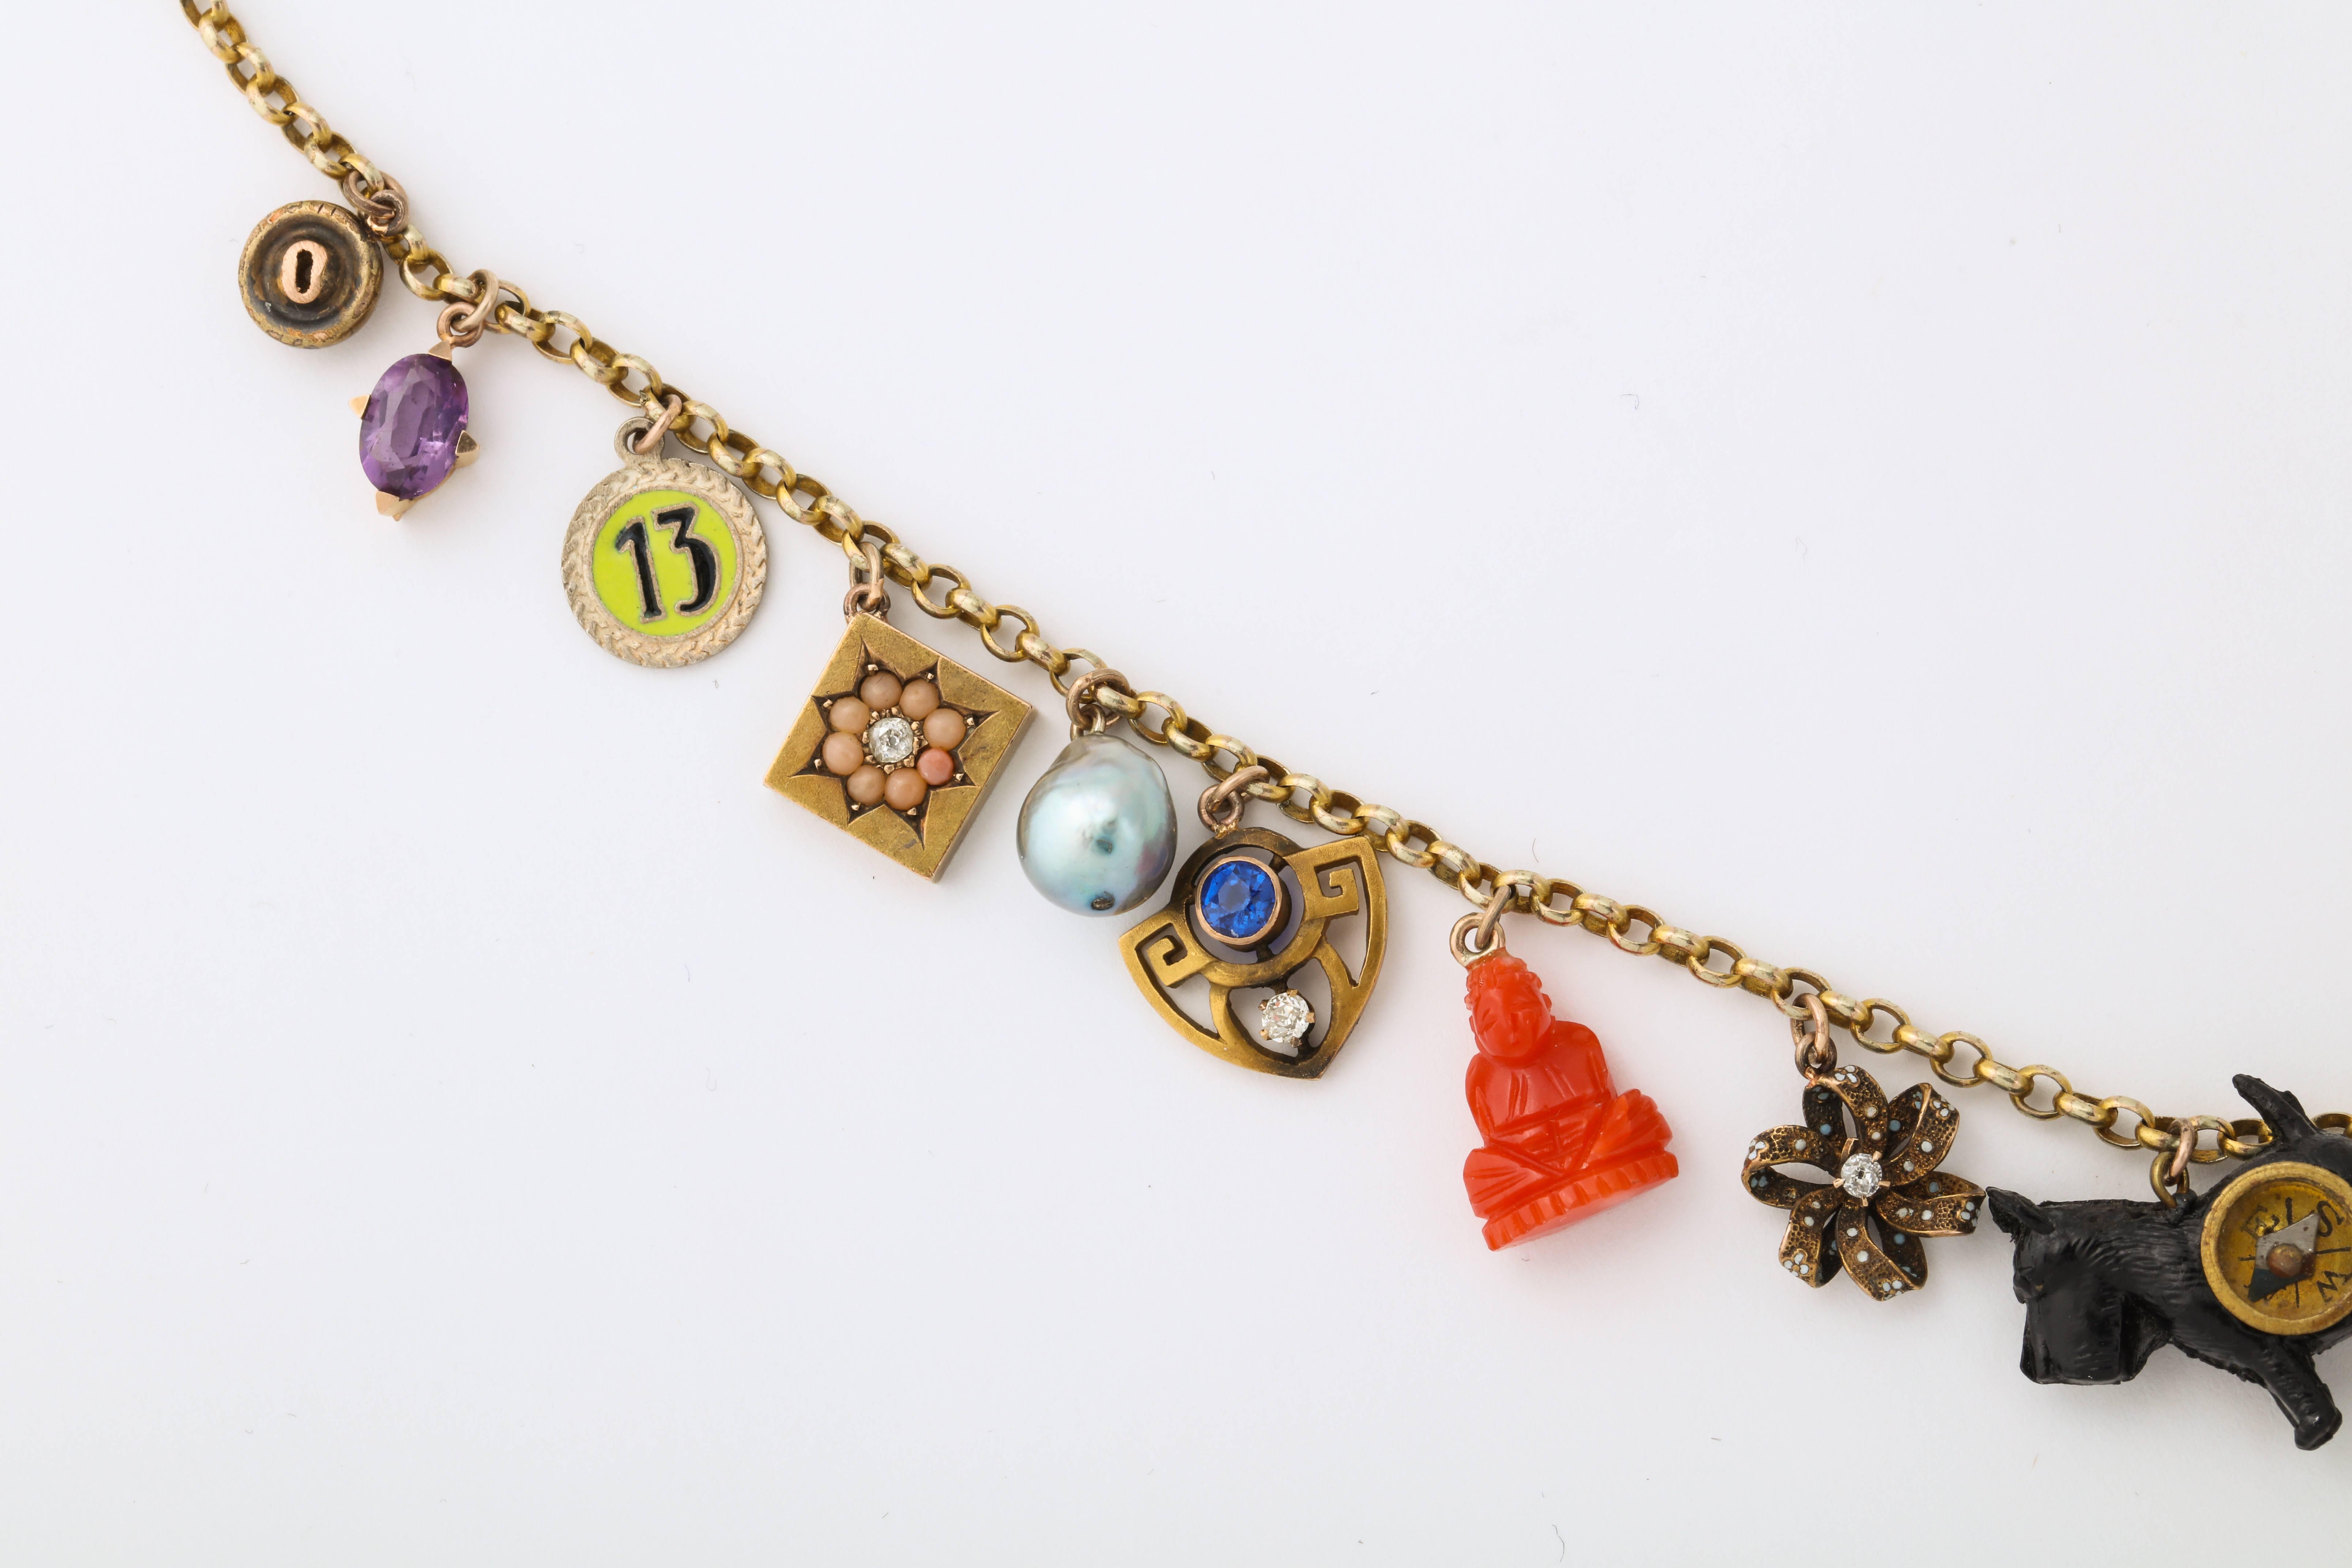 A wonderful pocca book charm necklace with 10 kt charms including diamond, amethyst, coral, sapphire, pearl, enamel, opal, garnet, and emerald designed by Katherine Wallach